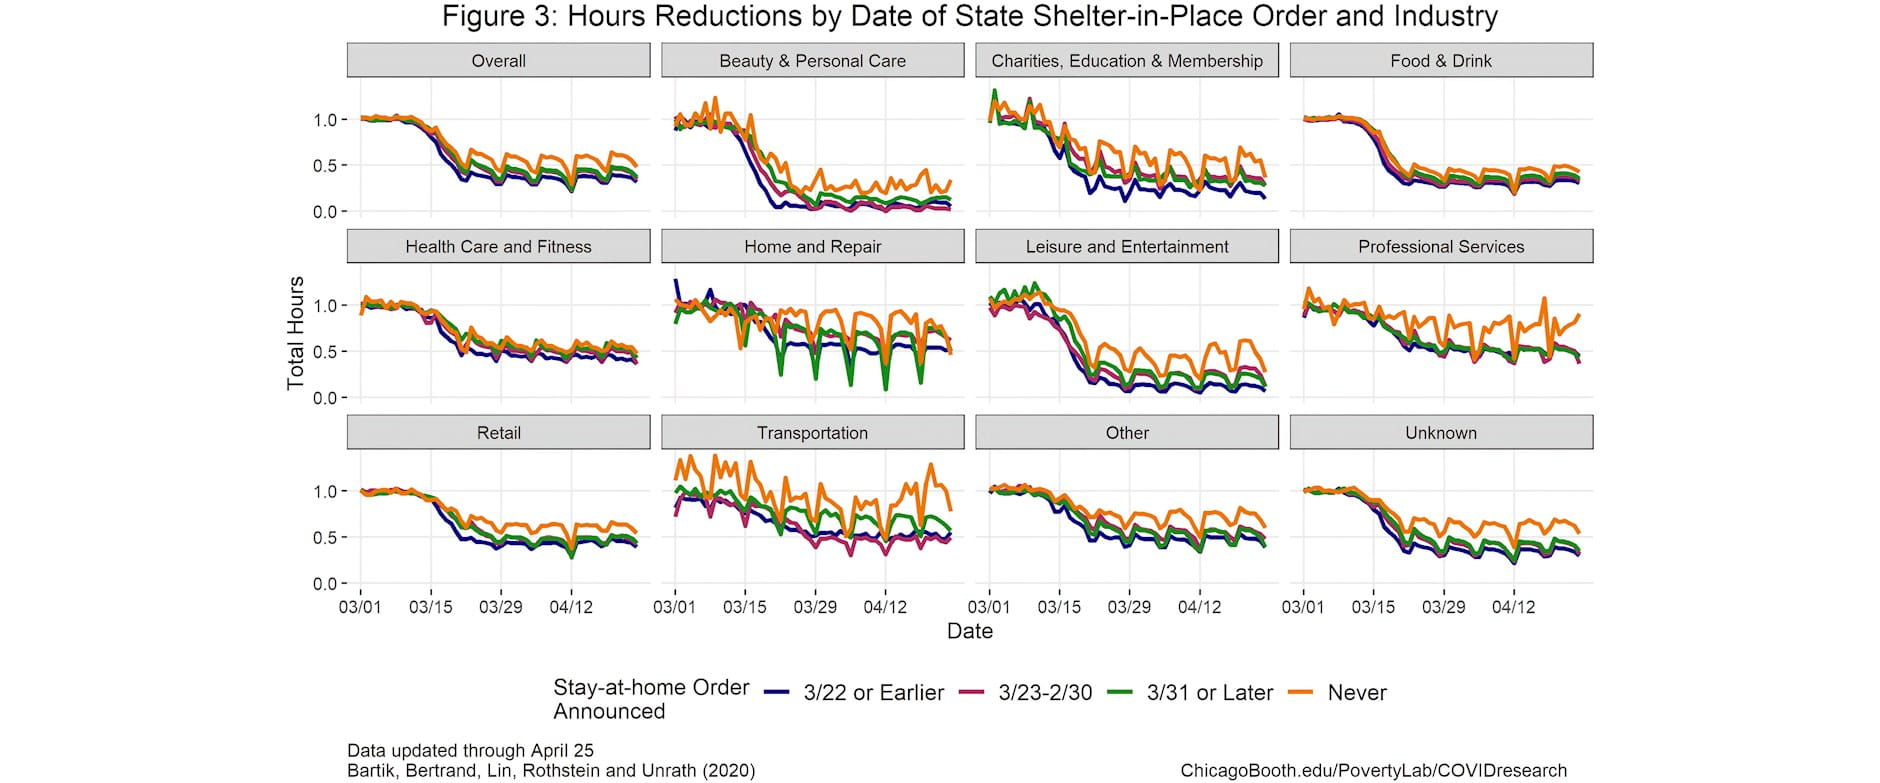 Figure 3: Hours Reductions by Date of State Shelter-in-Place Order and Industry